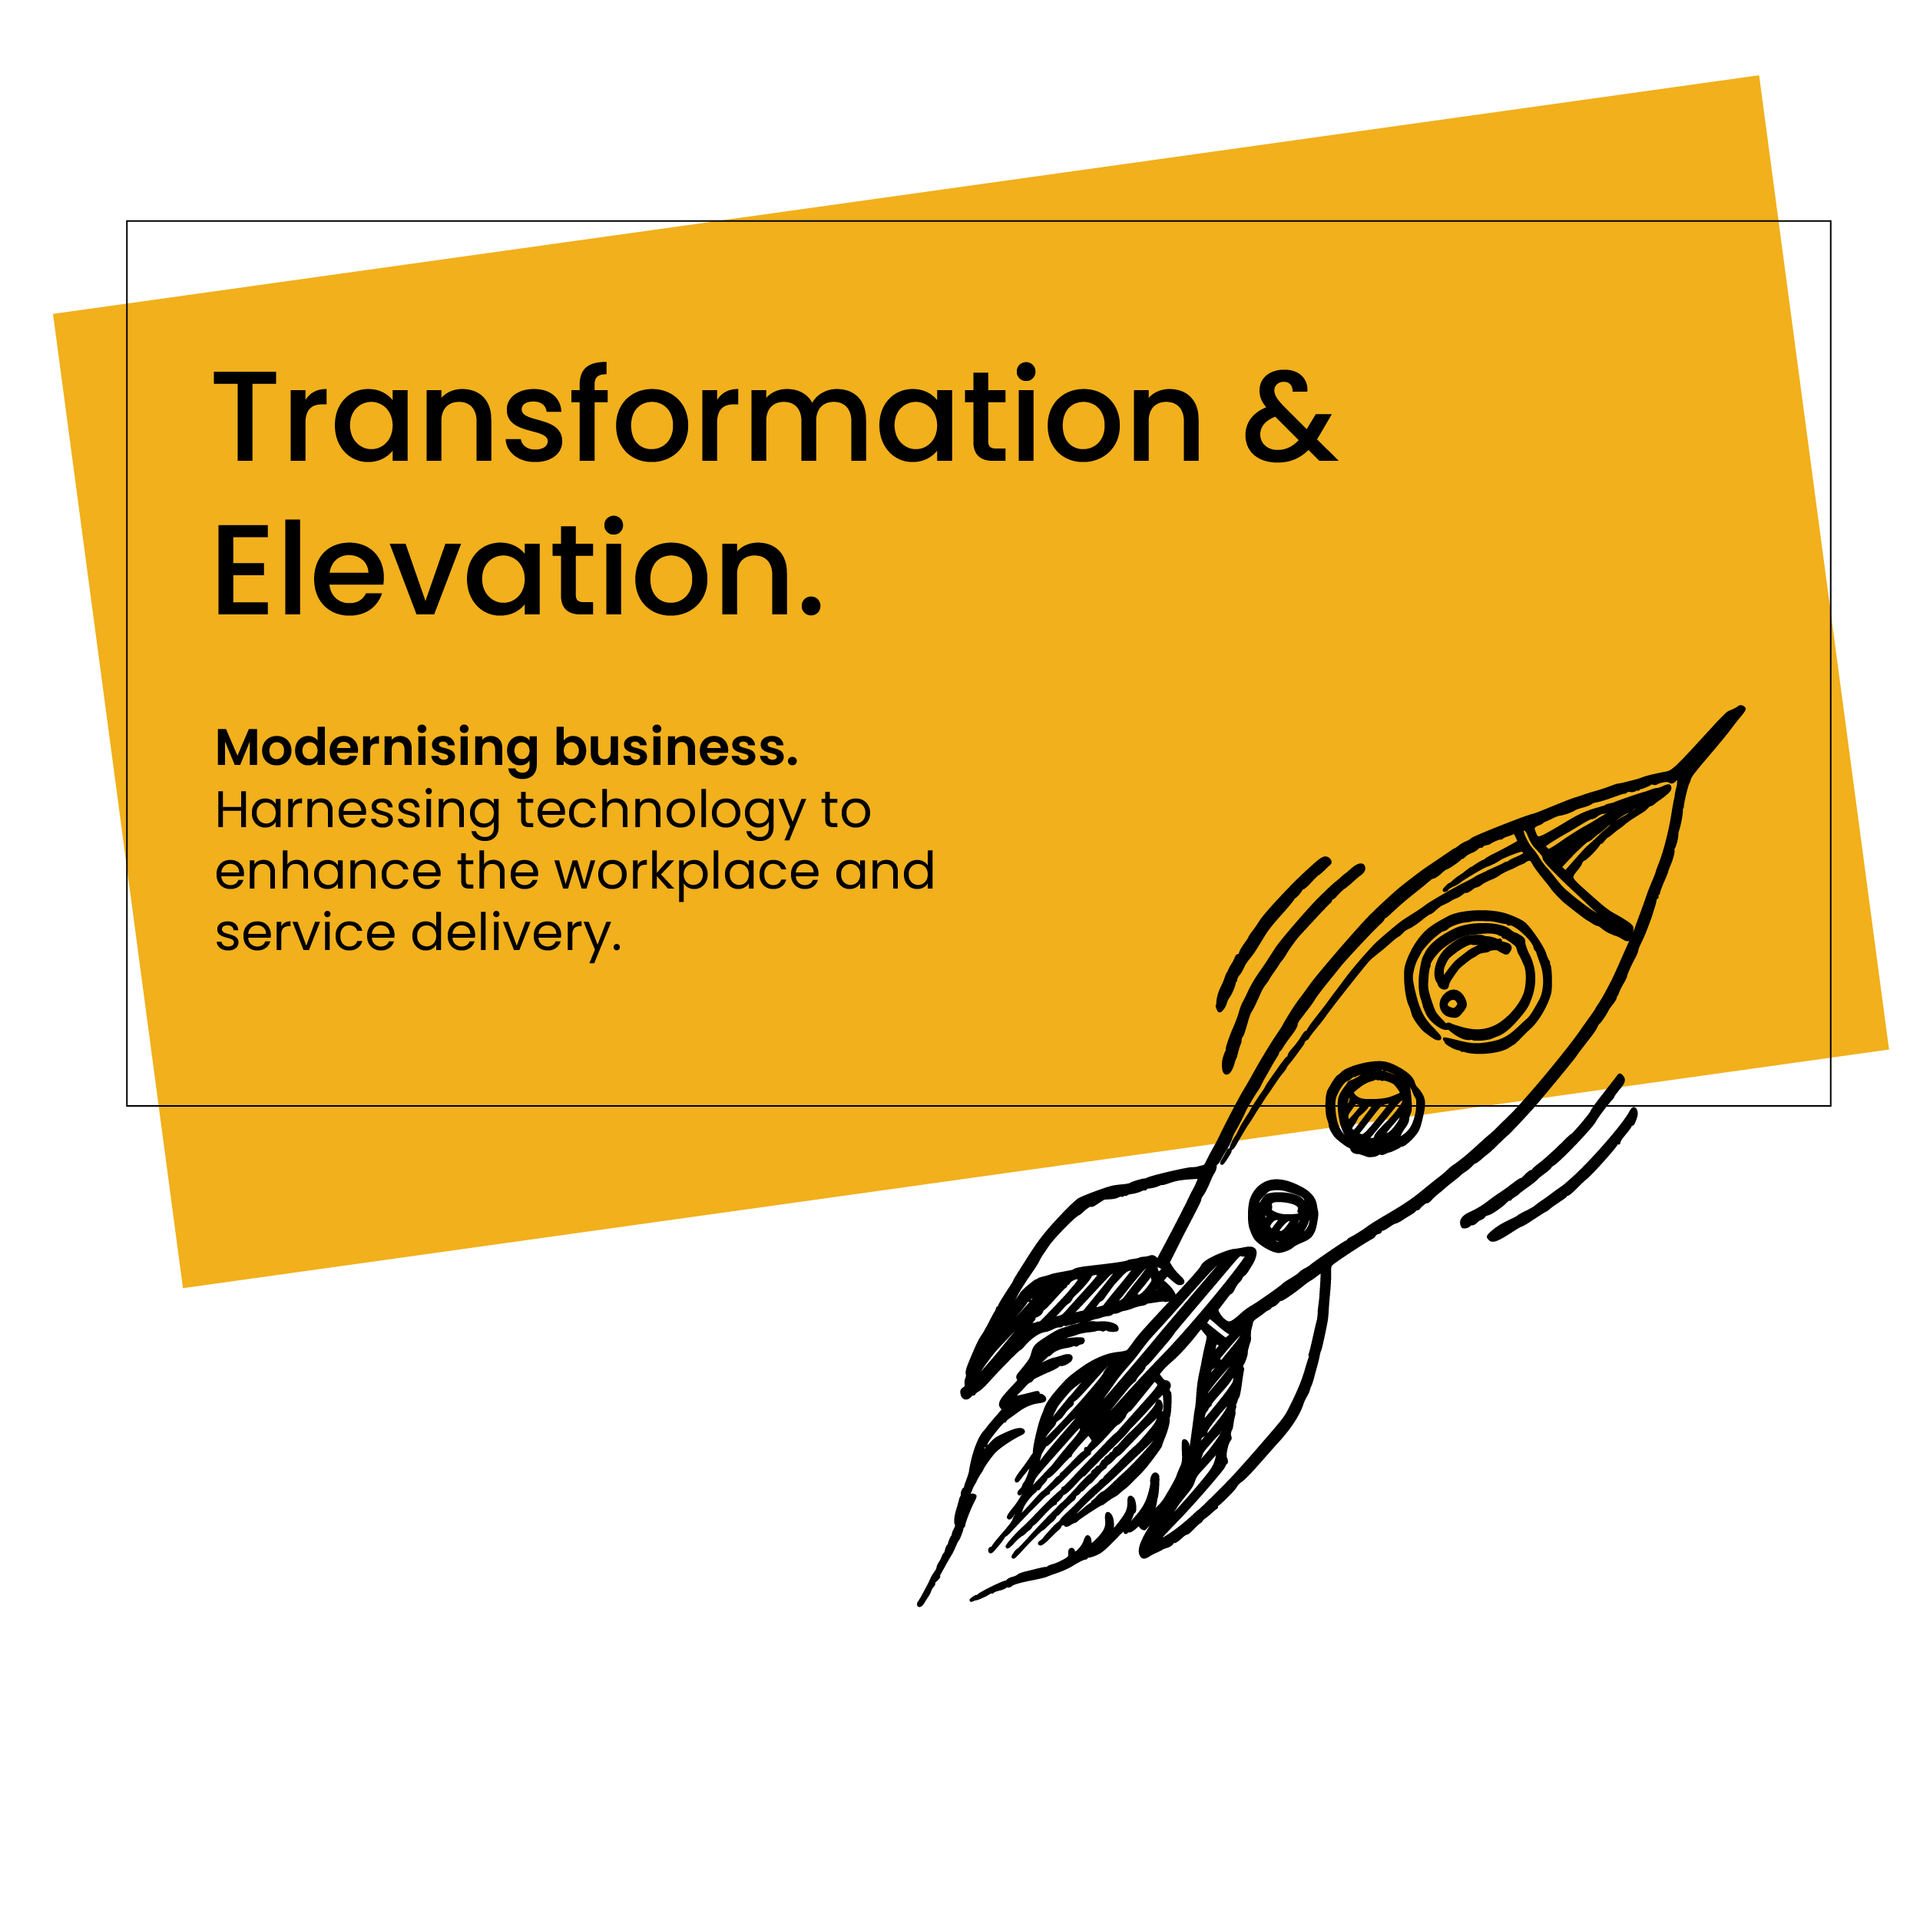 Rocket image to represent transformation and elevation